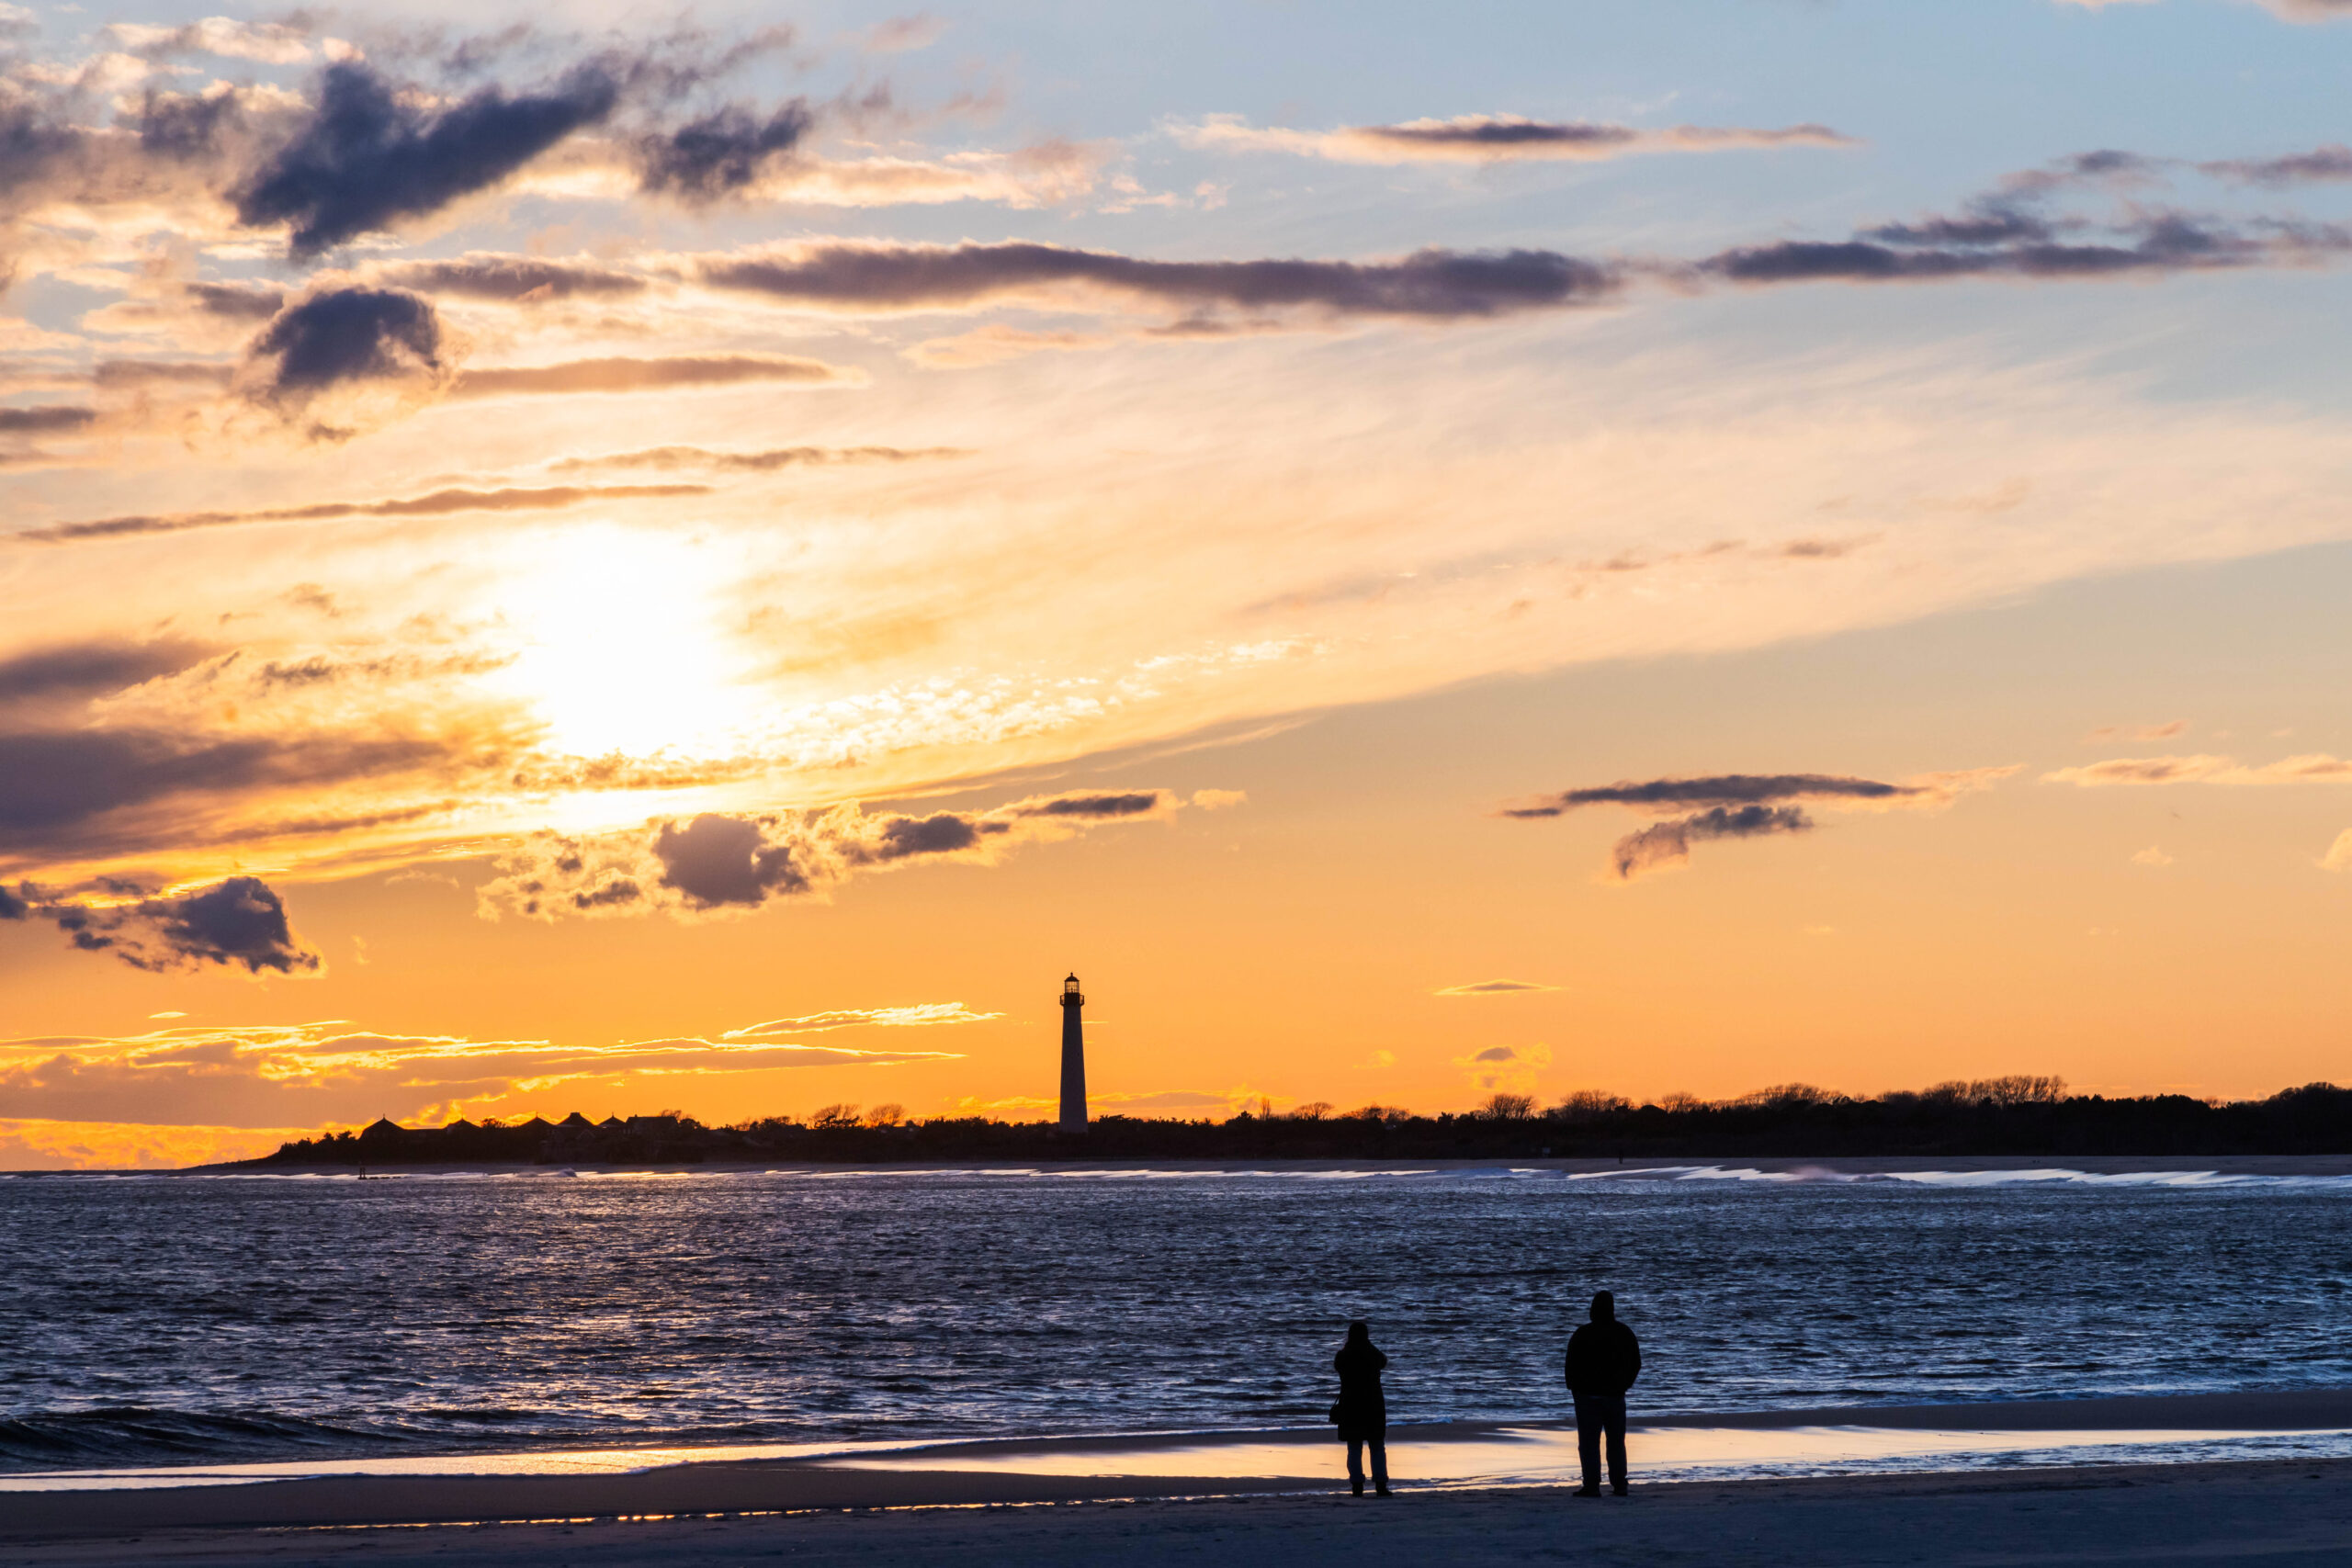 Two people watching the sun set on the beach. The sun is behind thin wispy clouds, and the Cape May Lighthouse in the distance. The sky is orange and blue.